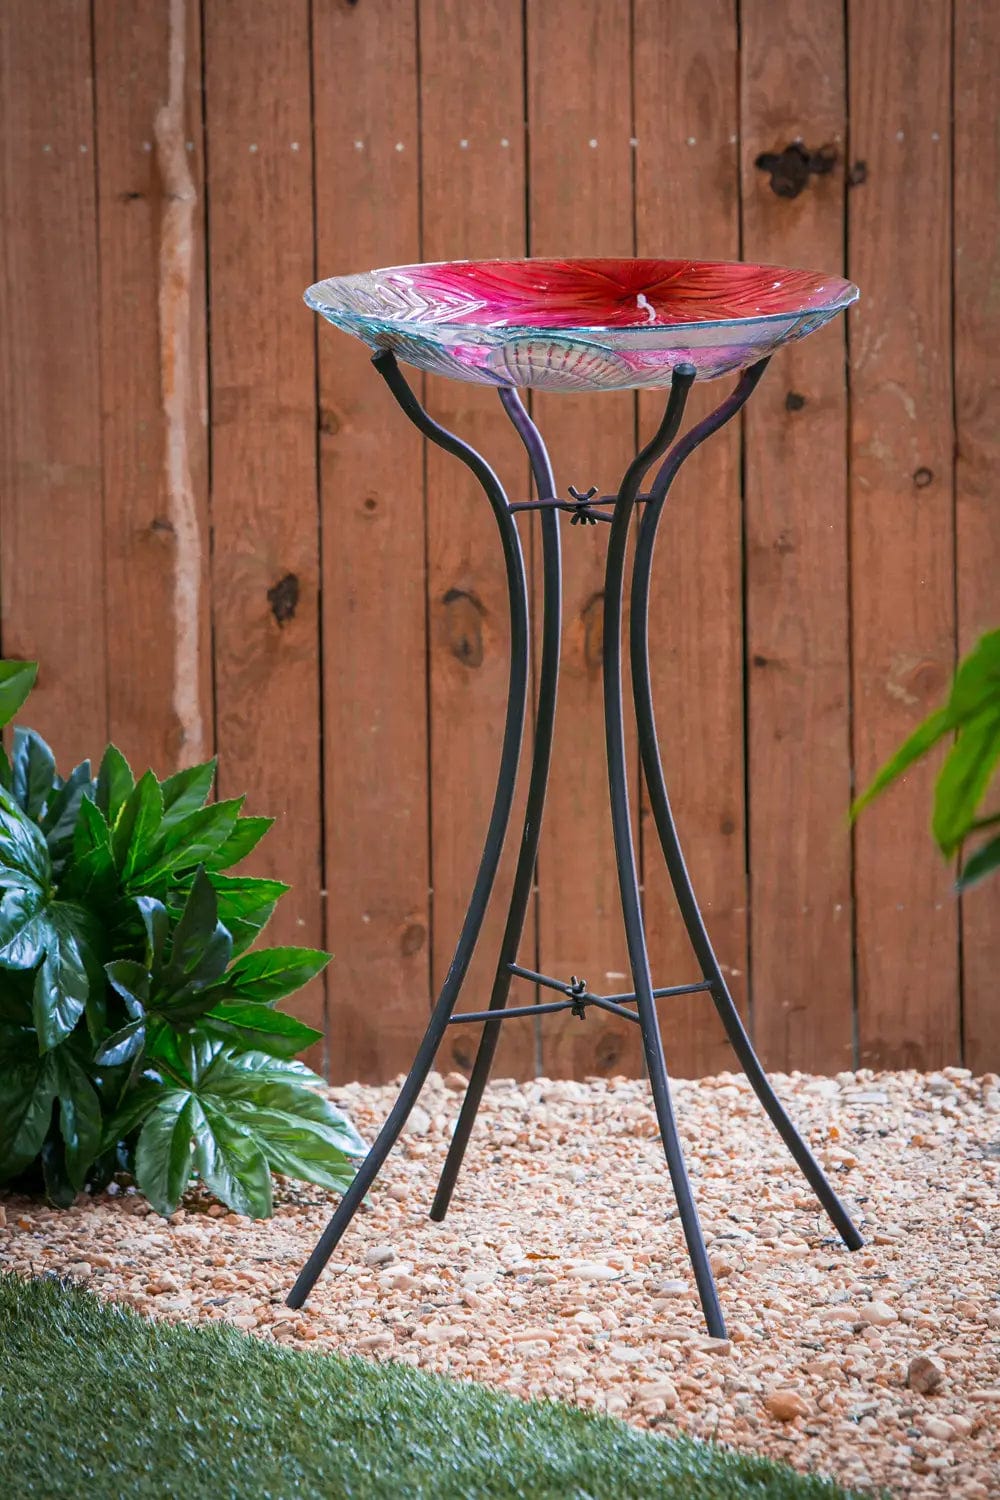 Bumble Bees 18" Glass Birdbath (stand sold separately)*